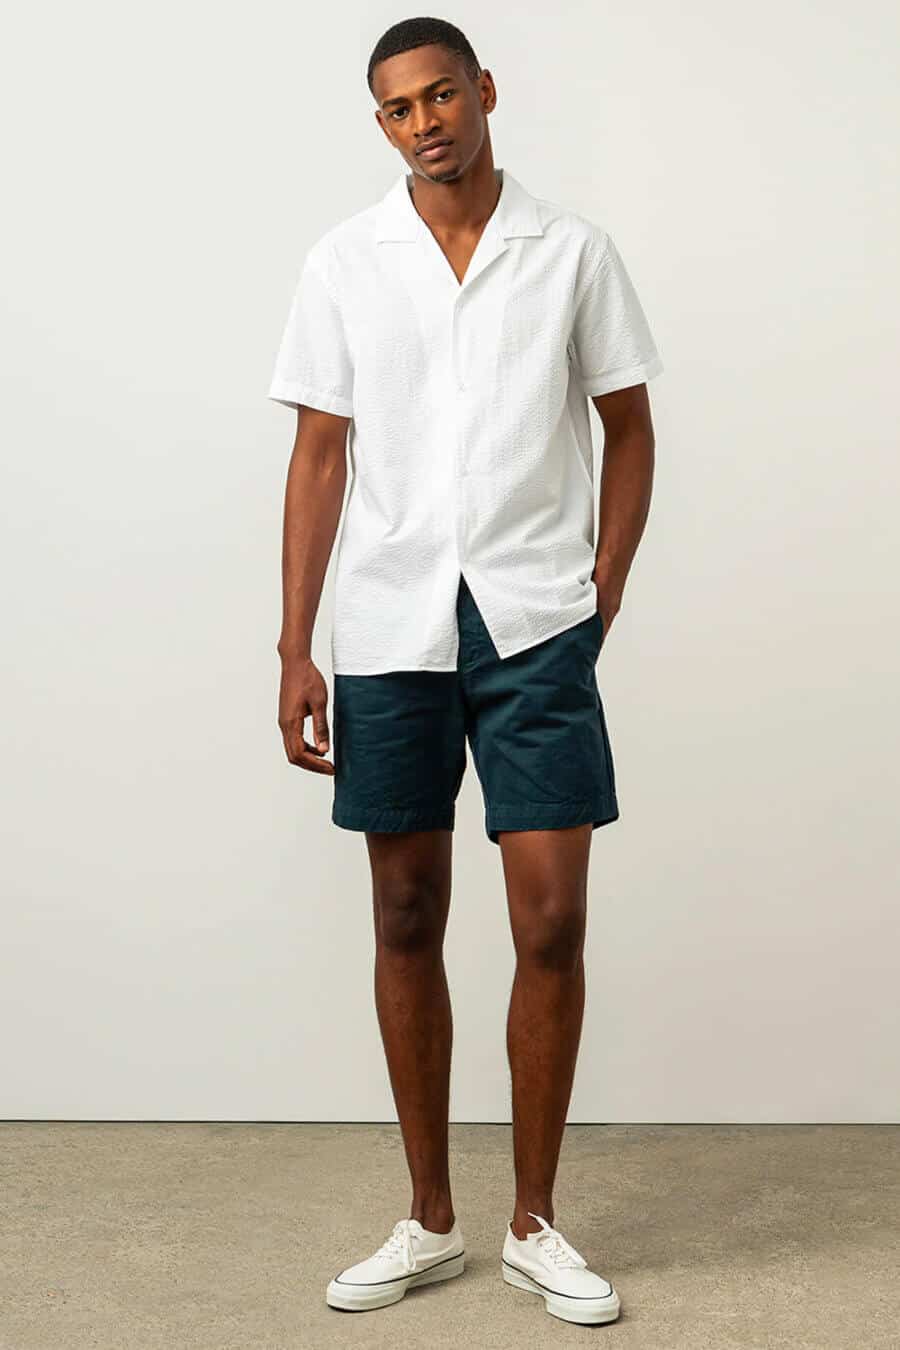 Men's navy shorts with white Cuban collar shirt and sneakers outfit